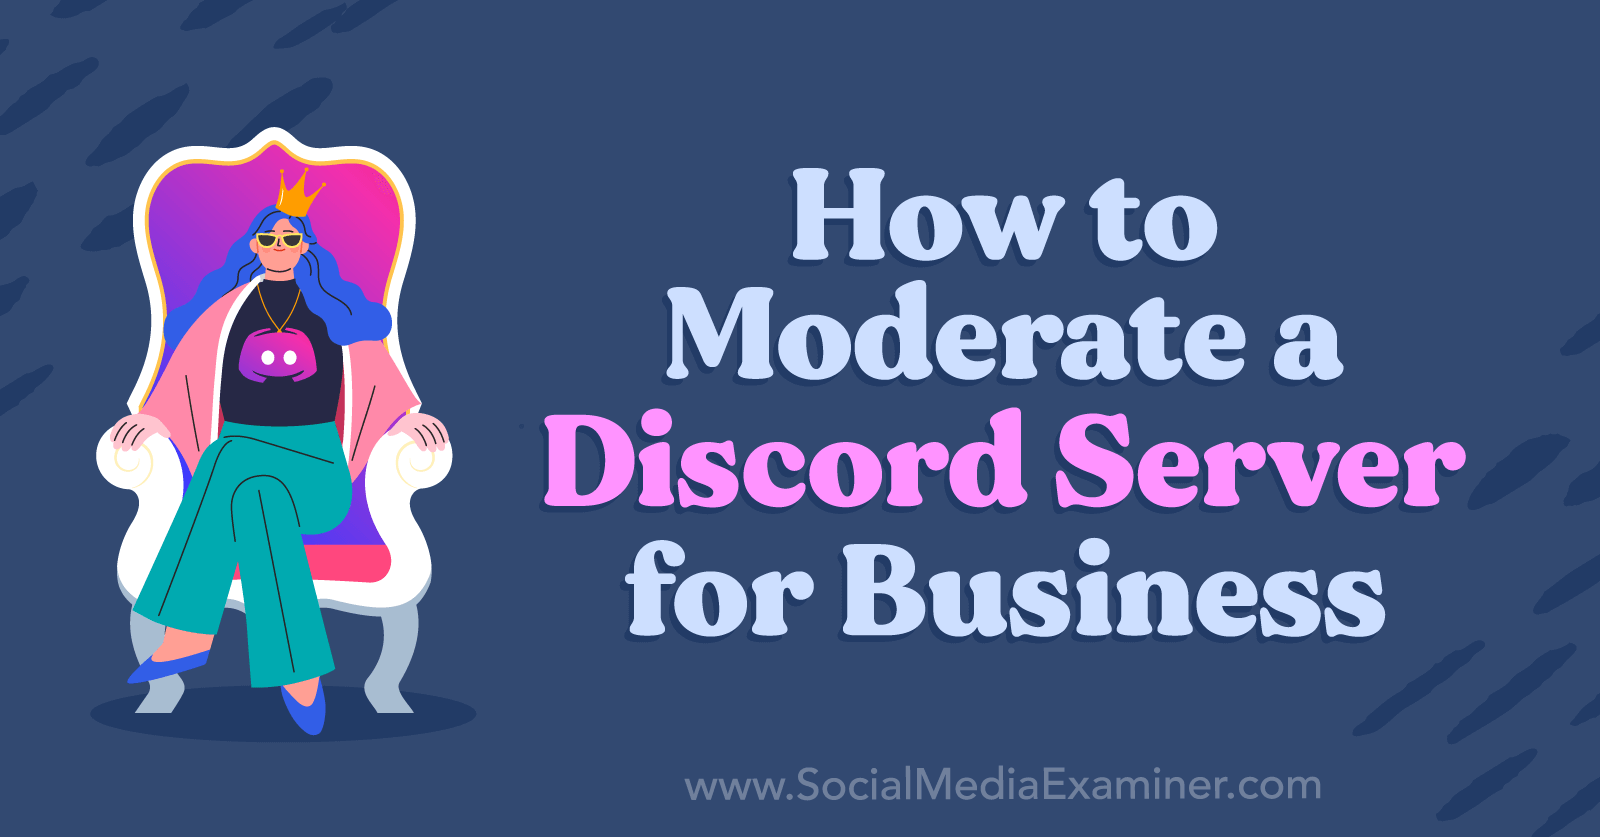 How to Moderate a Discord Server for Business